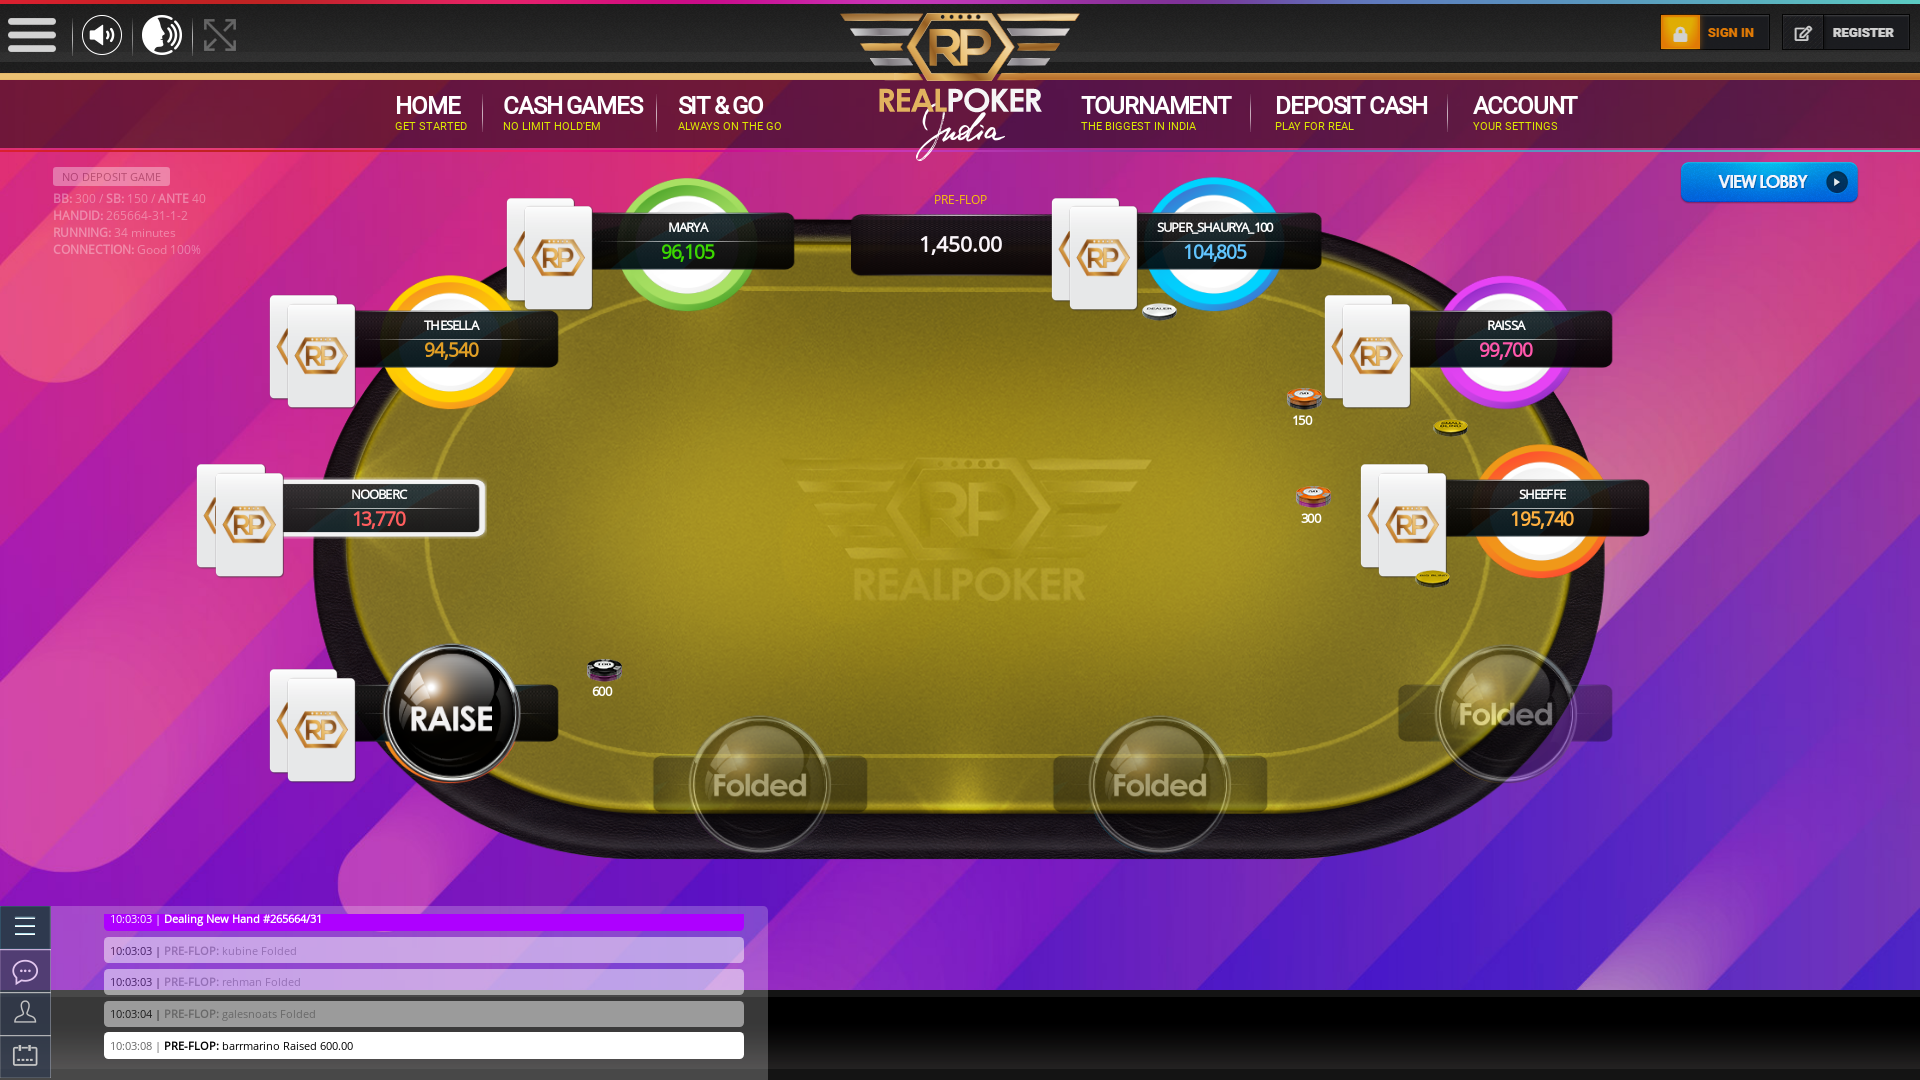 Real poker 10 player table in the 34th minute of the match